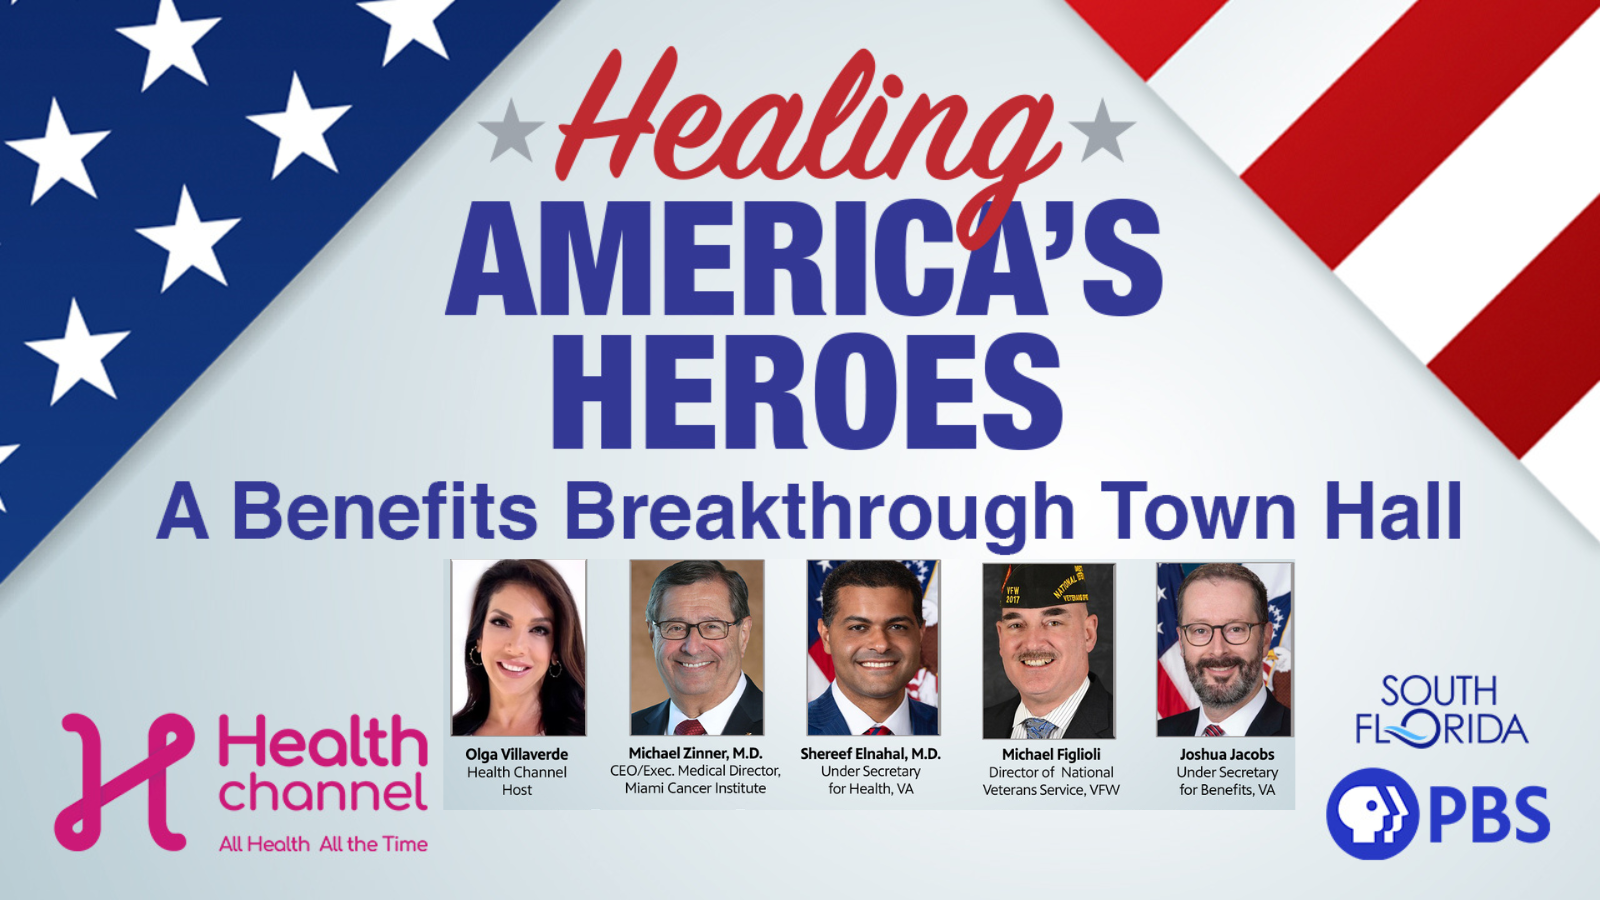 Healing America’s Heroes: A Benefits Breakthrough Town Hall